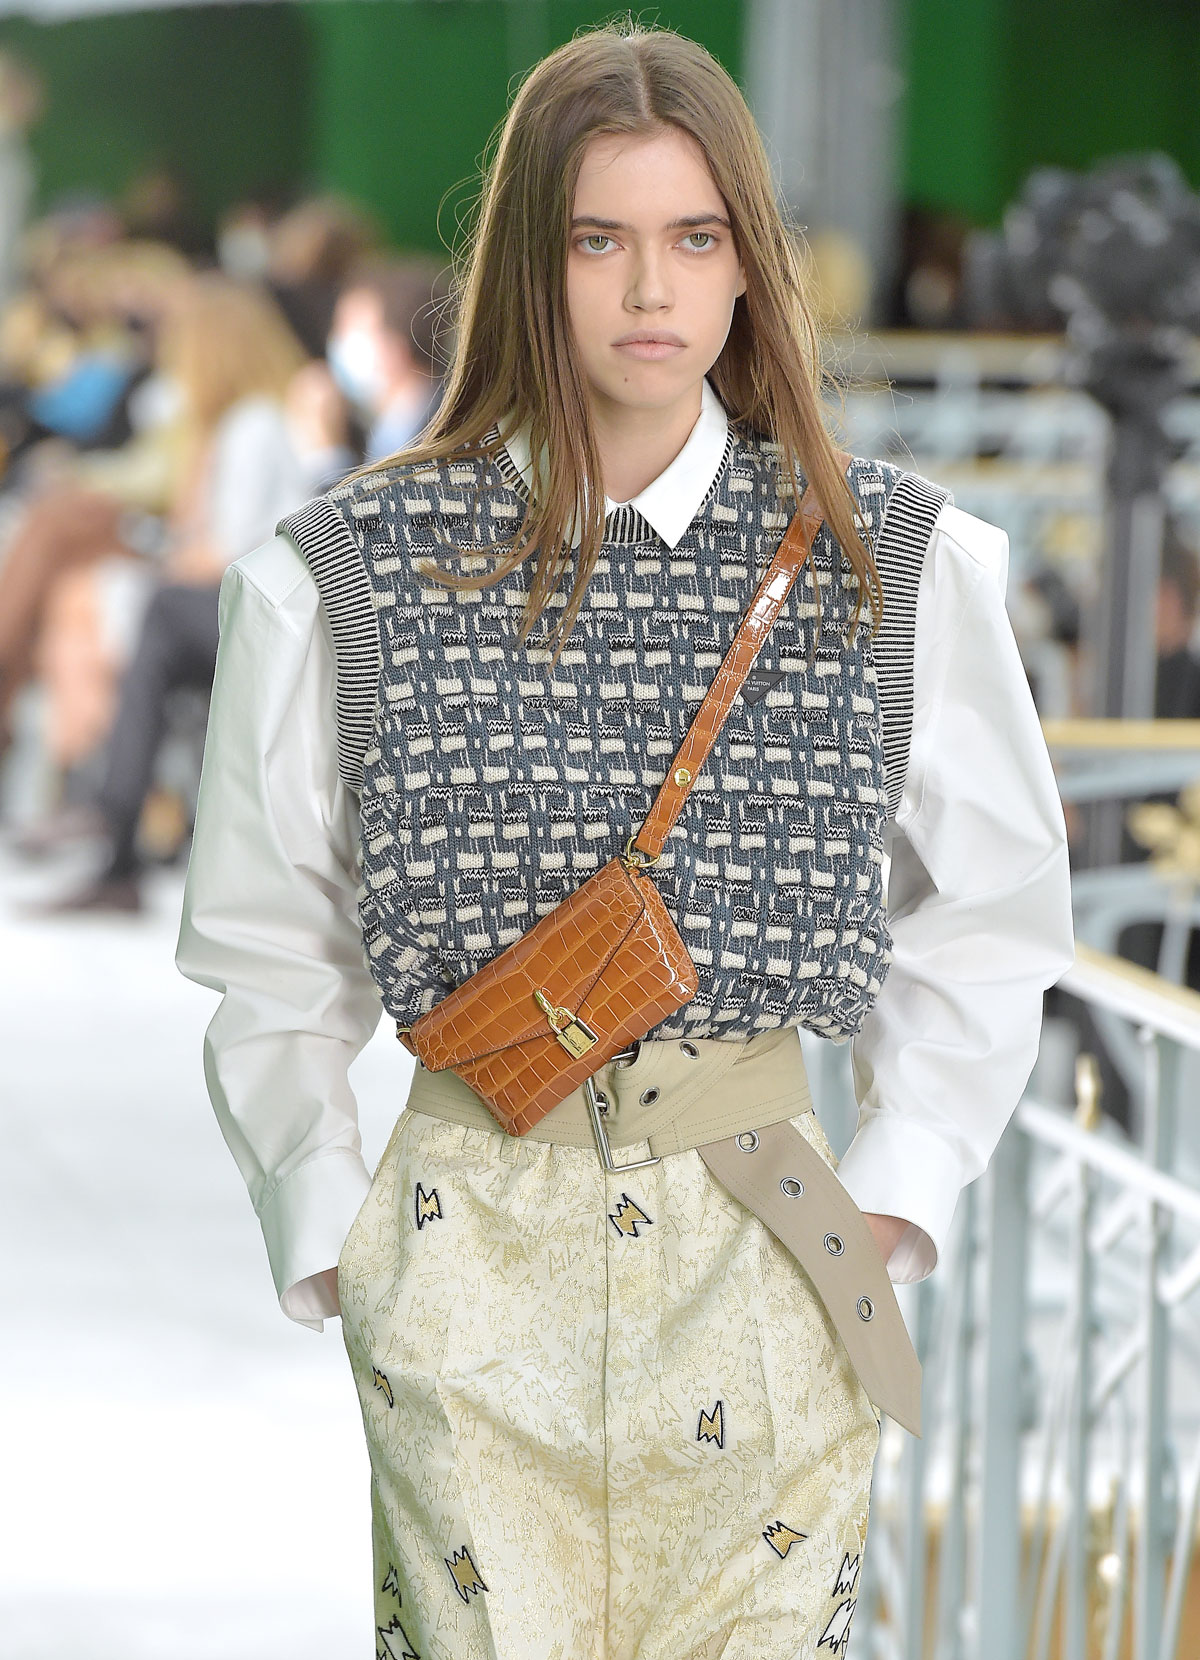 SEE: Louis Vuitton's 2021 collection - Rediff.com